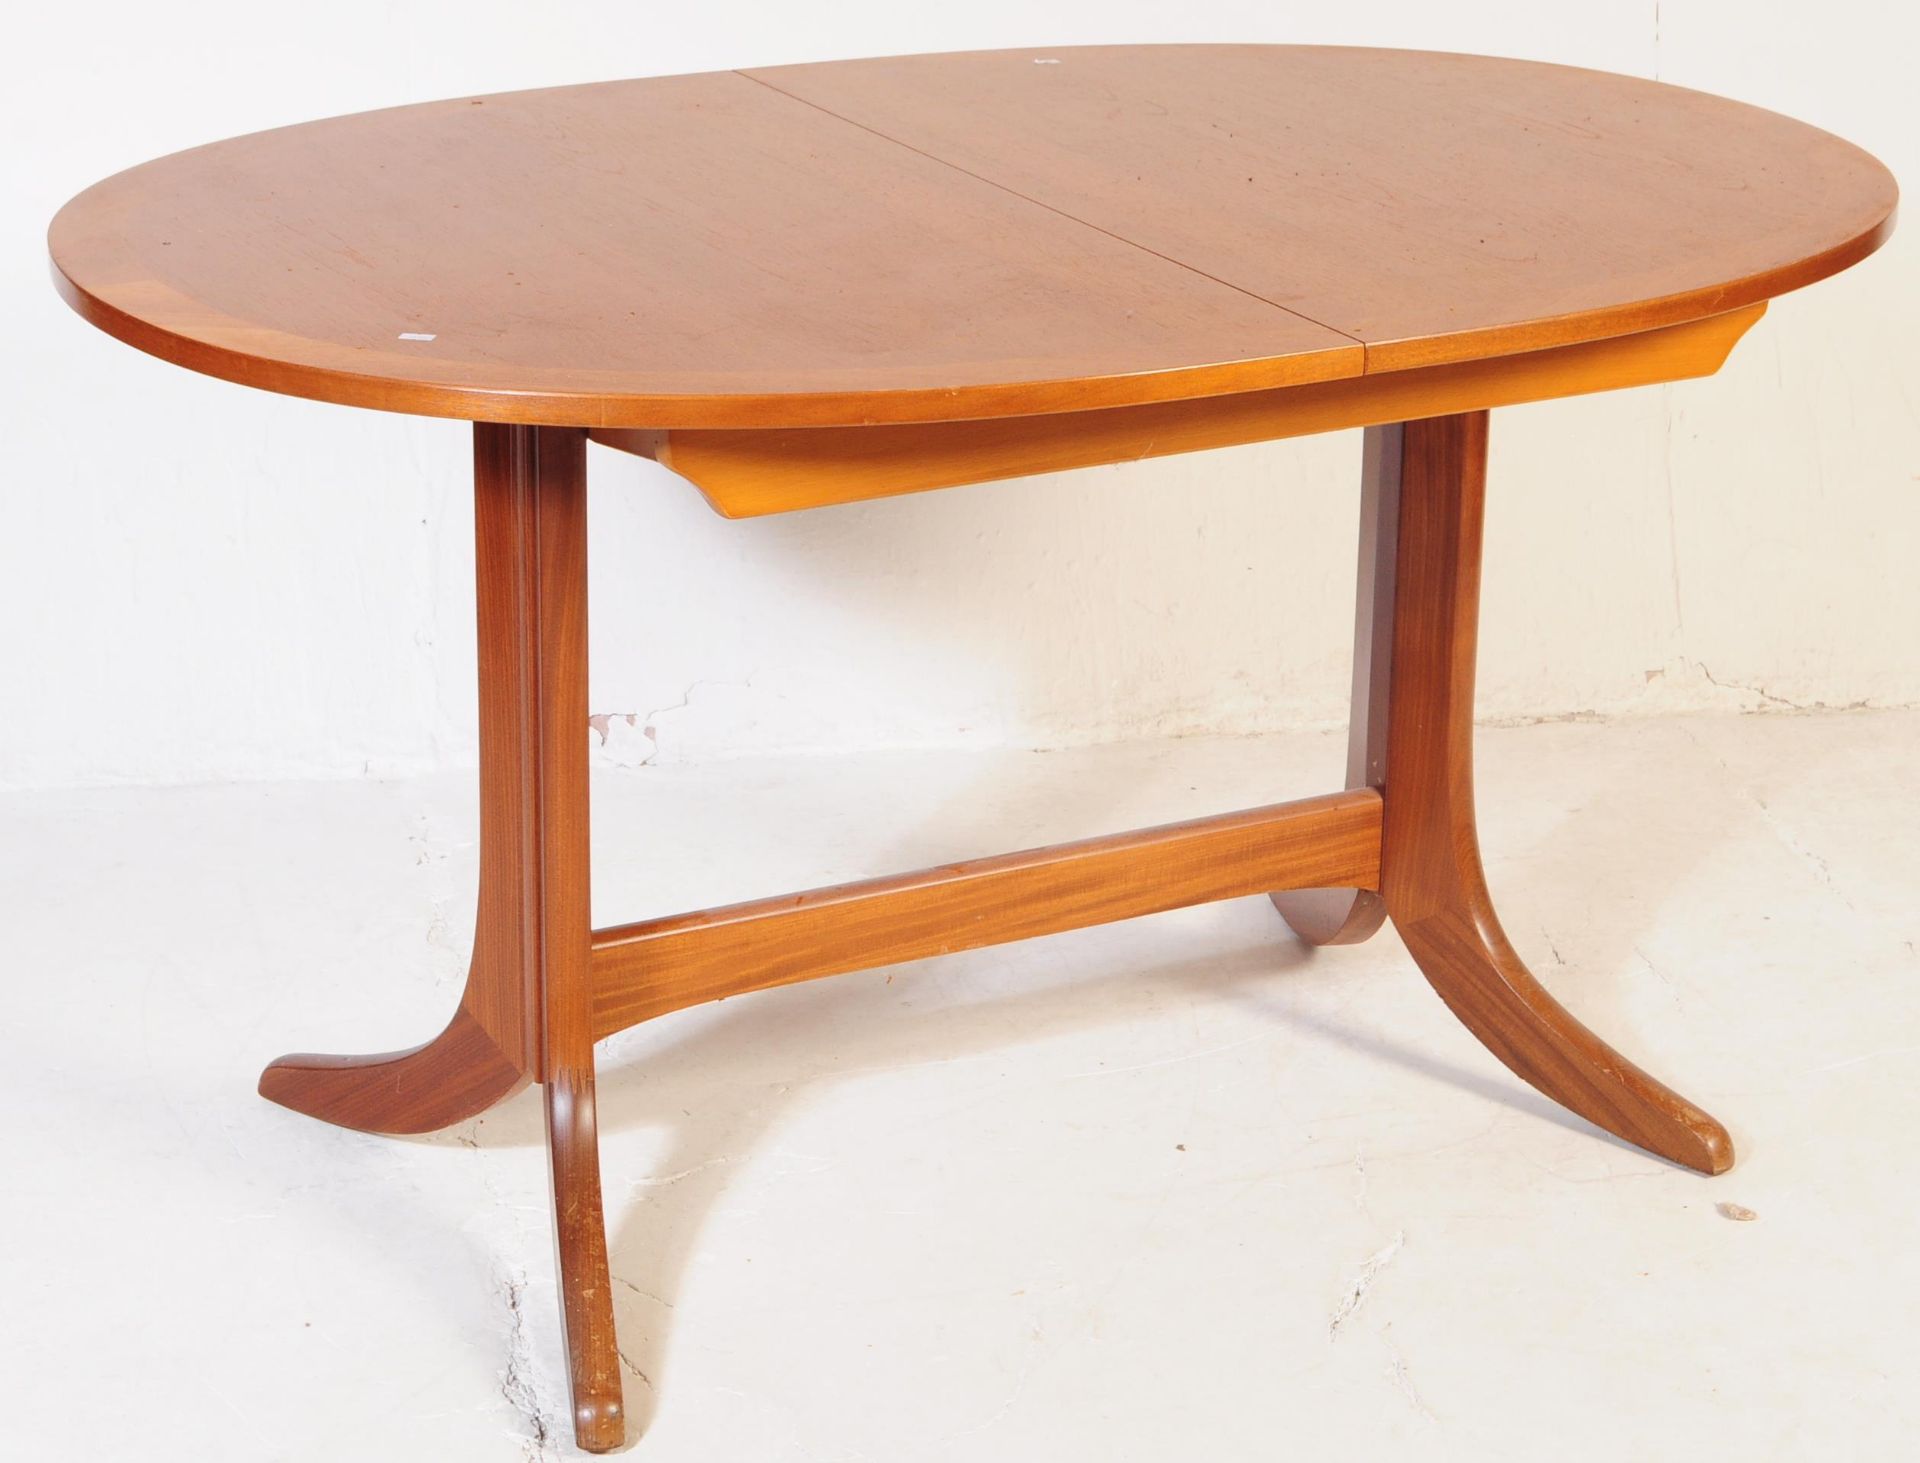 RETRO NATHAN FURNITURE DINING TABLE WITH DANISH STYLE CHAIRS - Image 2 of 7